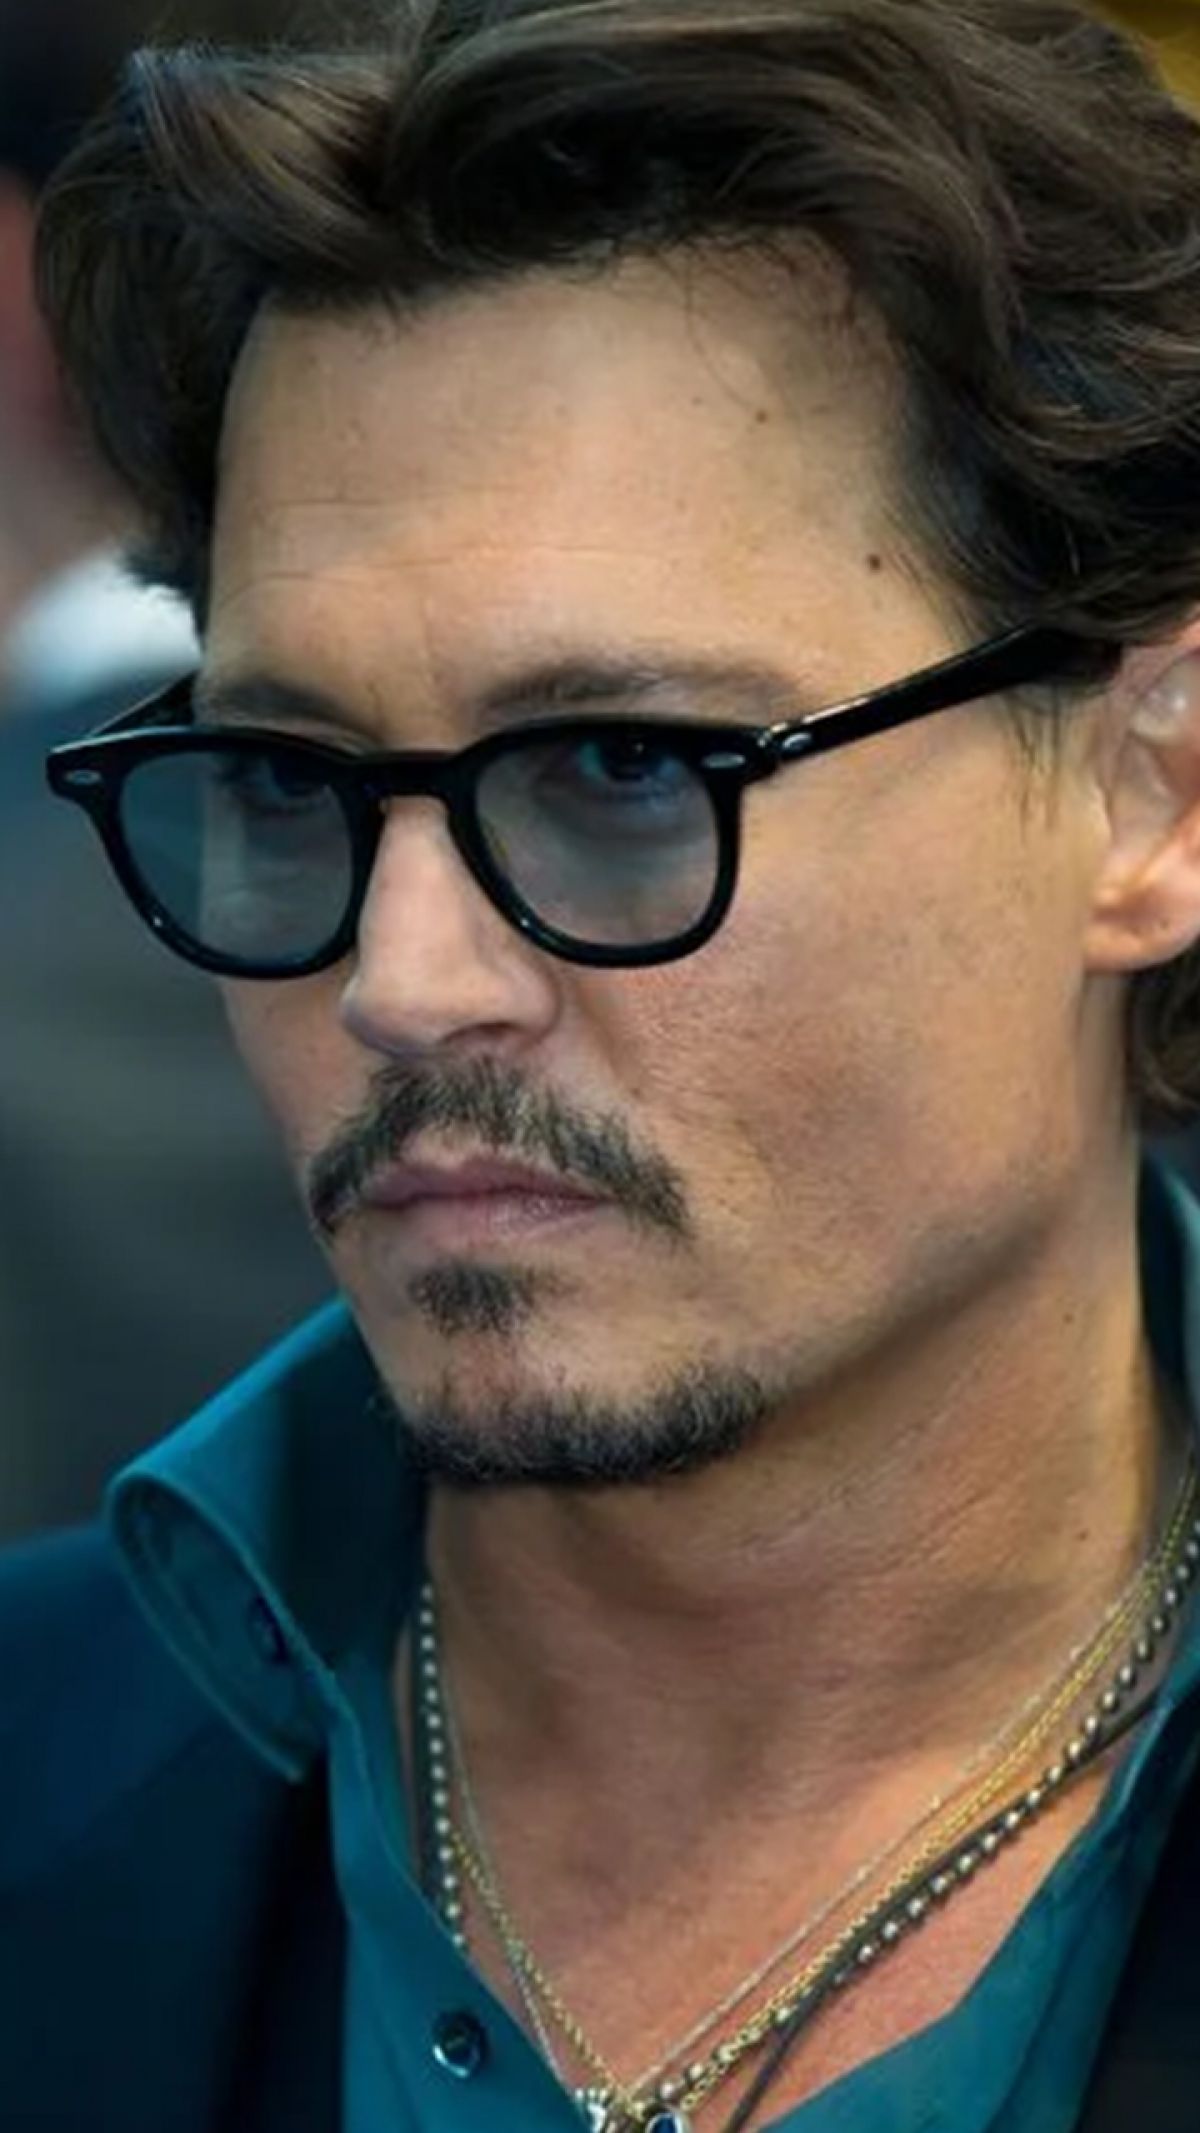 LVMH CEO says Johnny Depp 'working very well' for Dior Sauvage sales